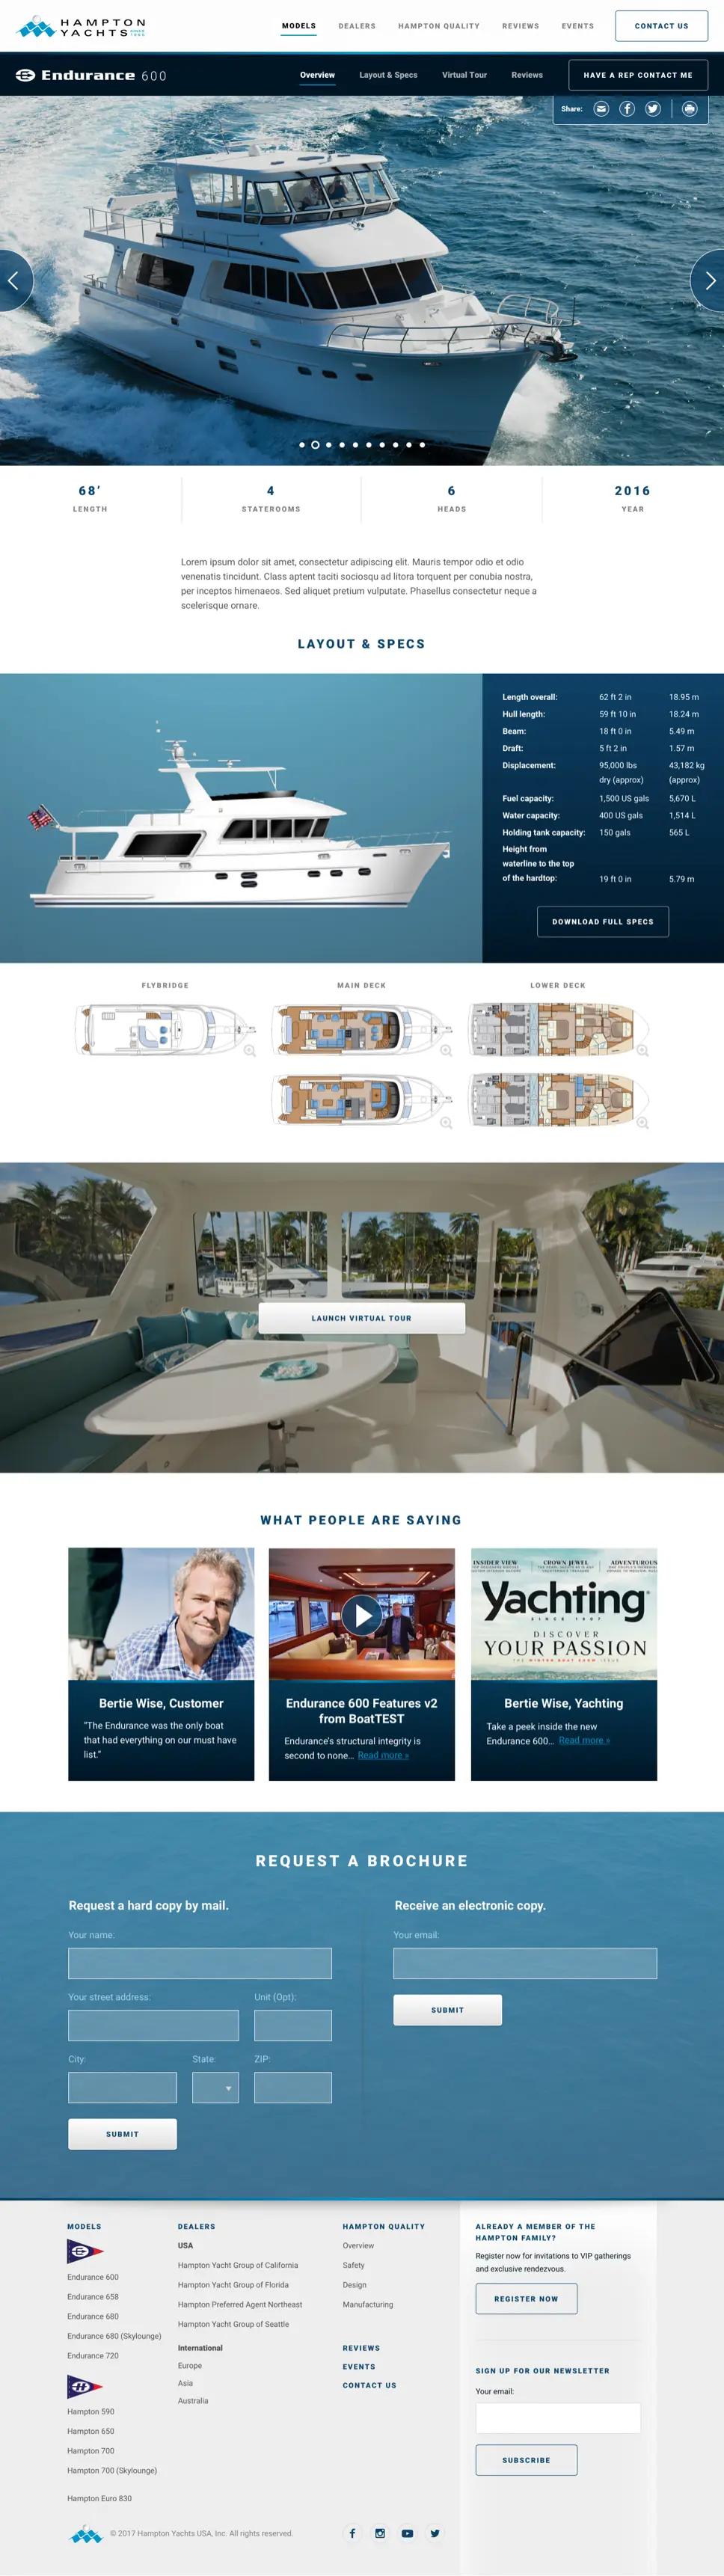 A screenshot of a Hampton Yachts' yacht model overview page.